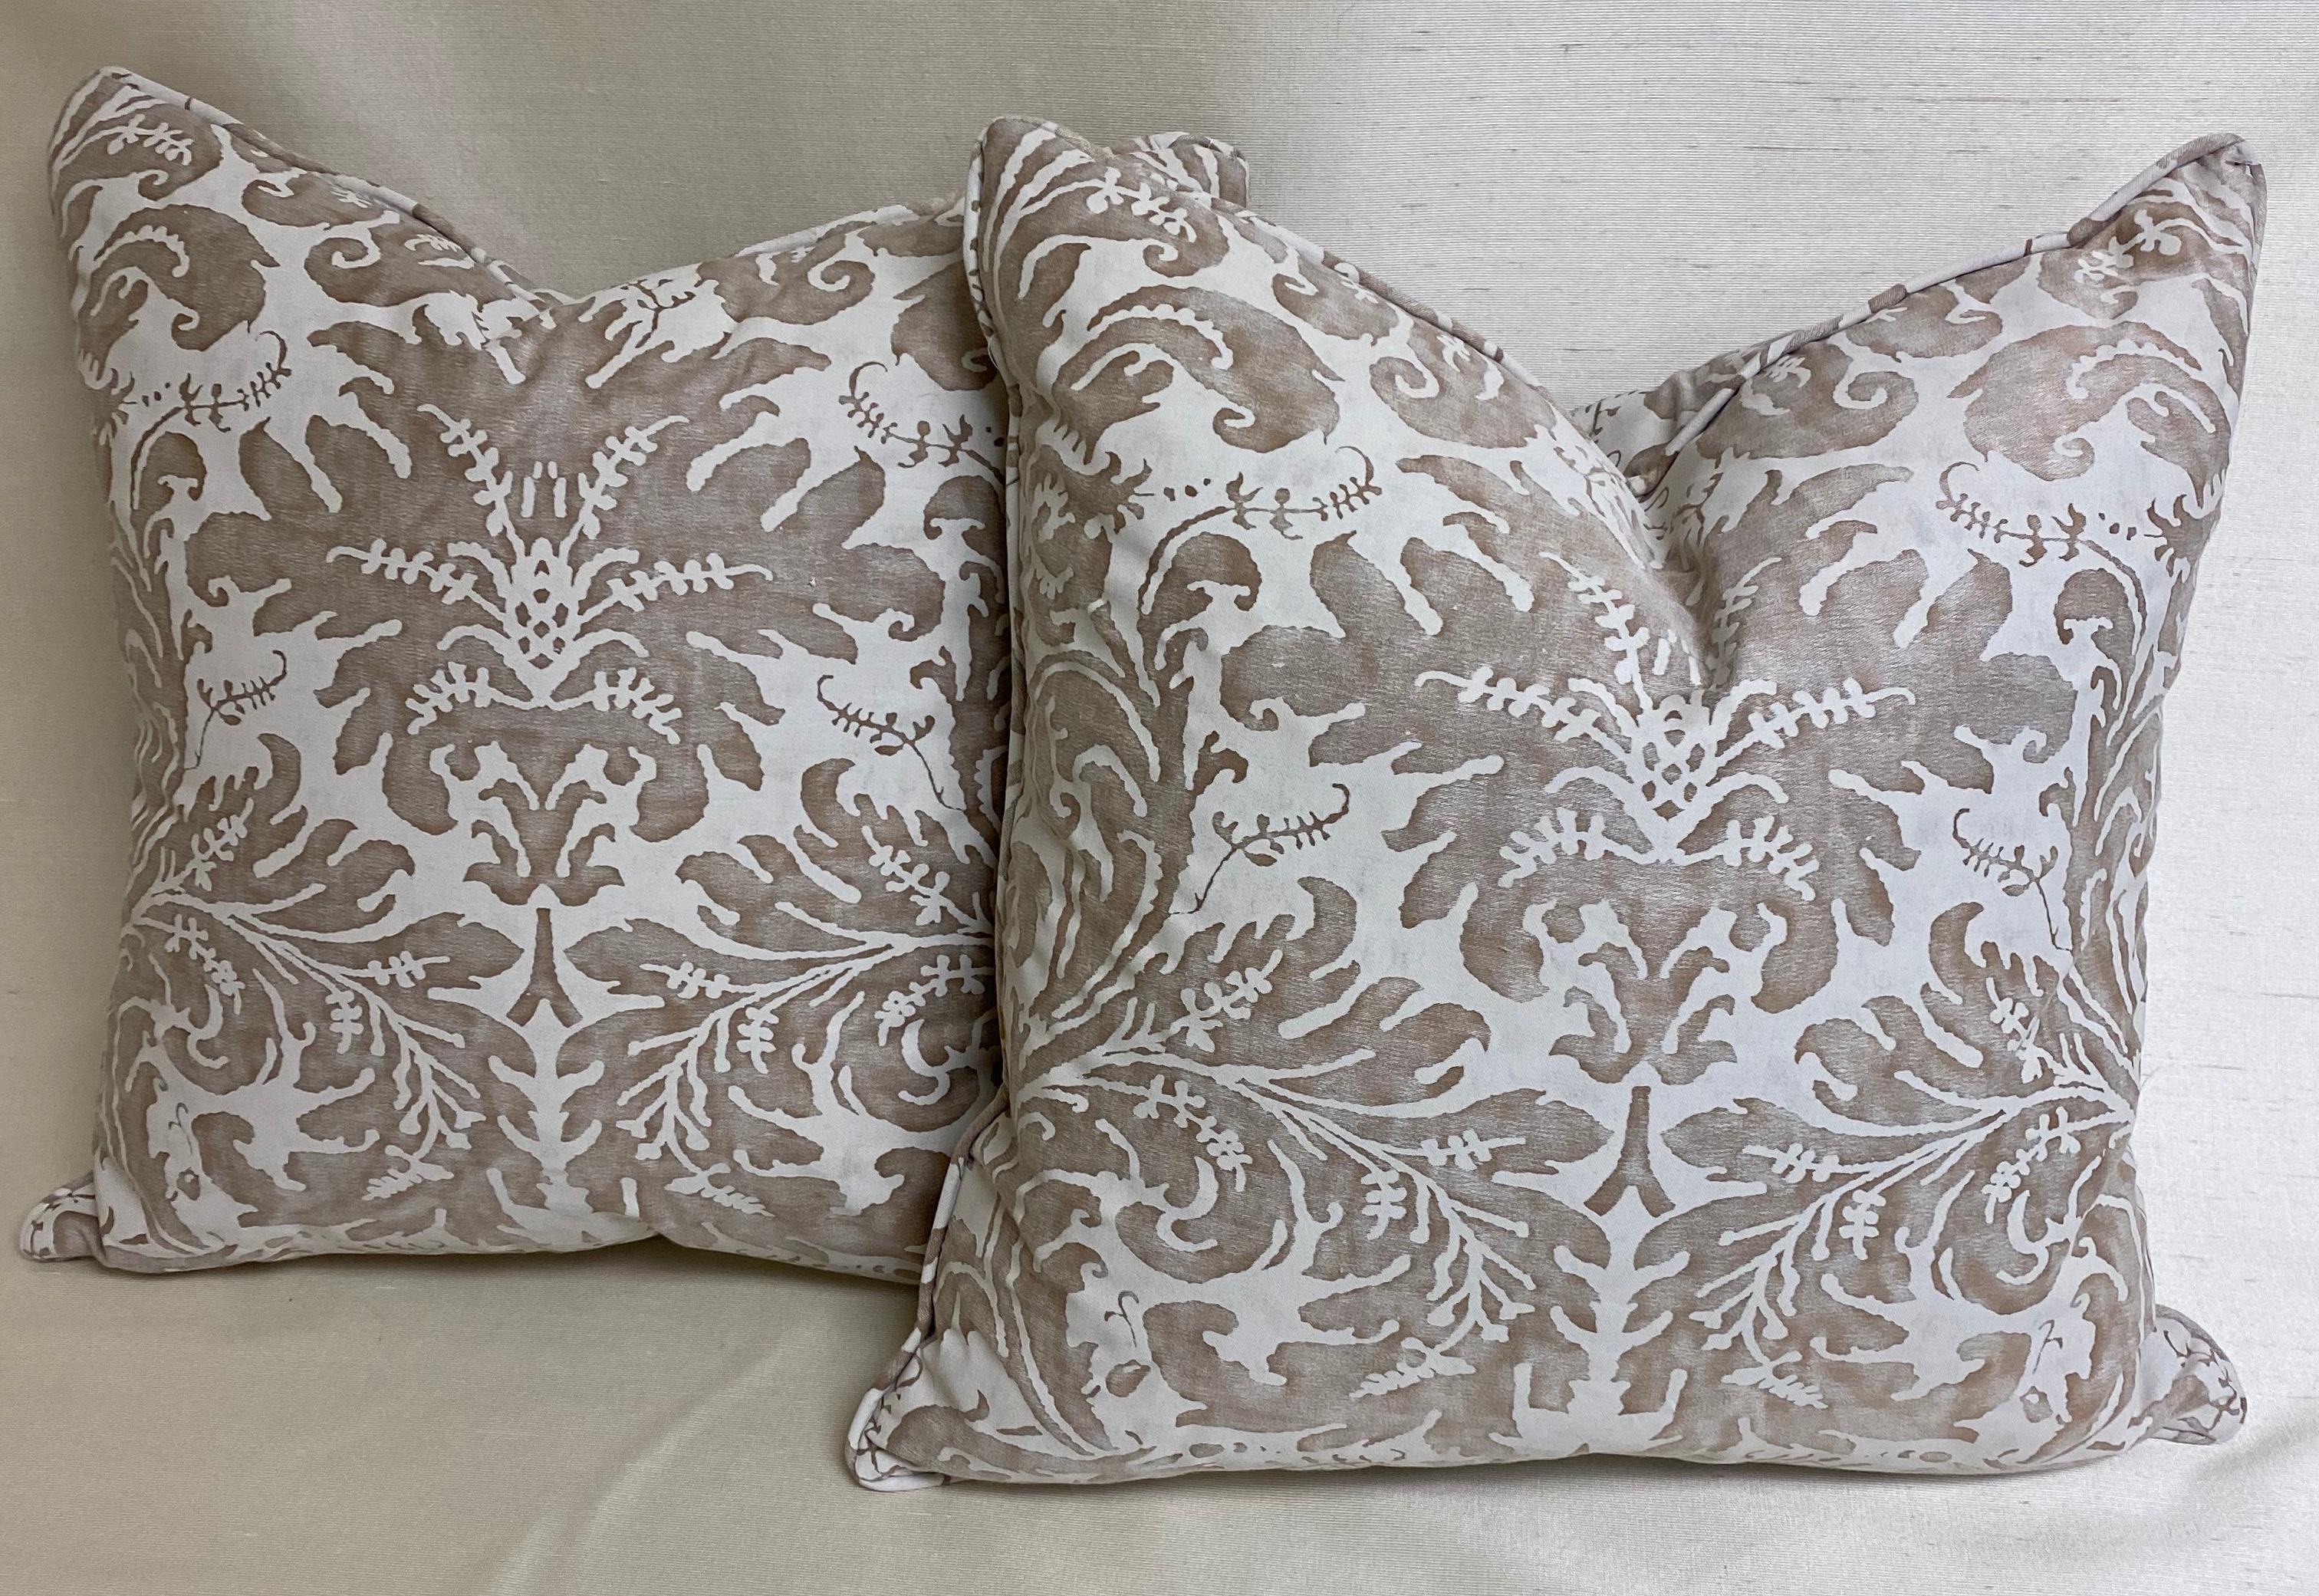 Italian Pair of Fortuny Cushions in Silvery-Taupe and White in the 